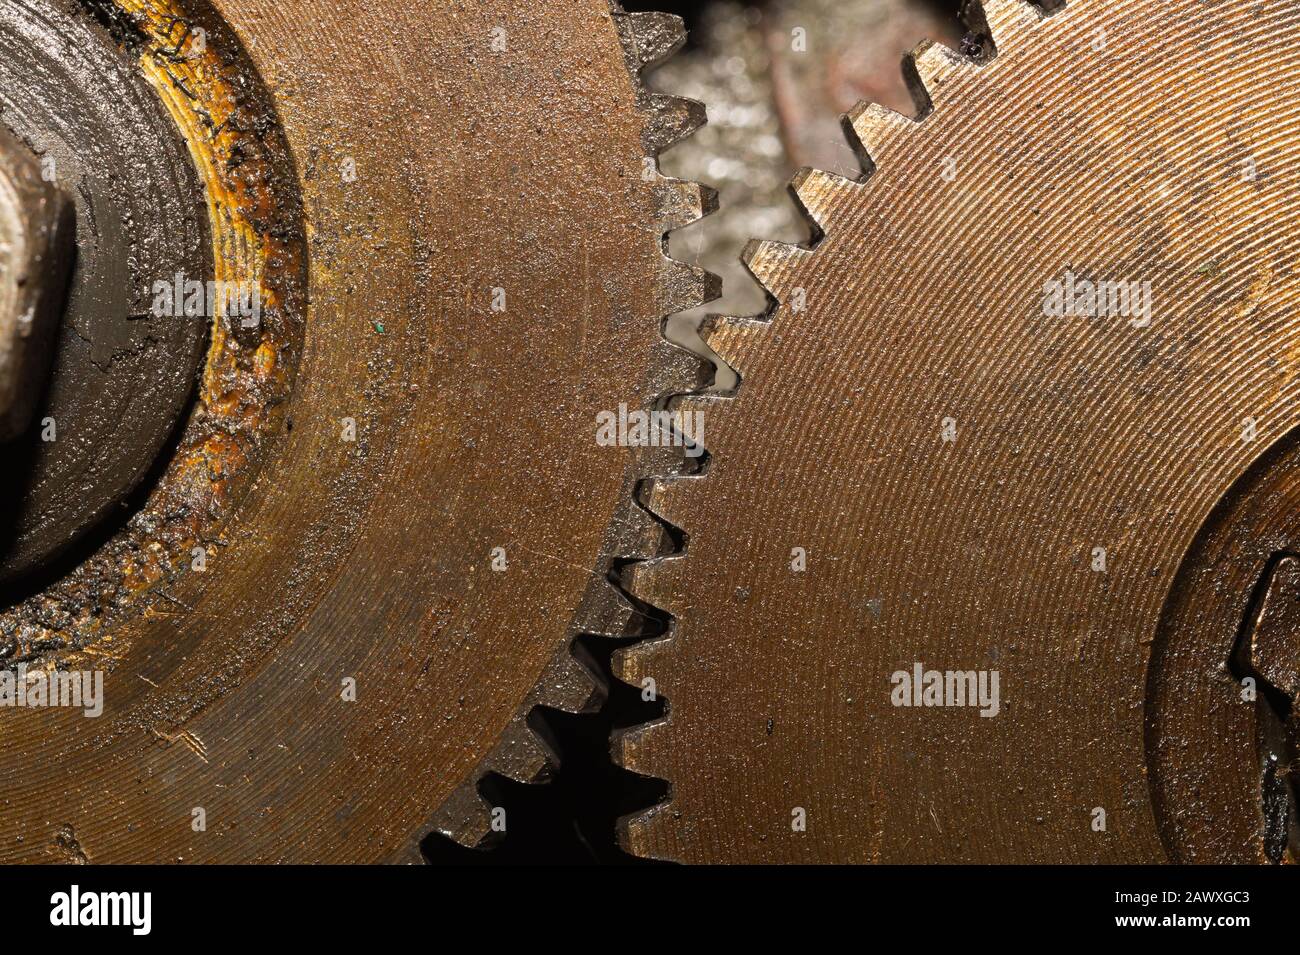 Gears of industrial machine. detail of mechanism. old cogwheels. mechanical parts of machinery Stock Photo